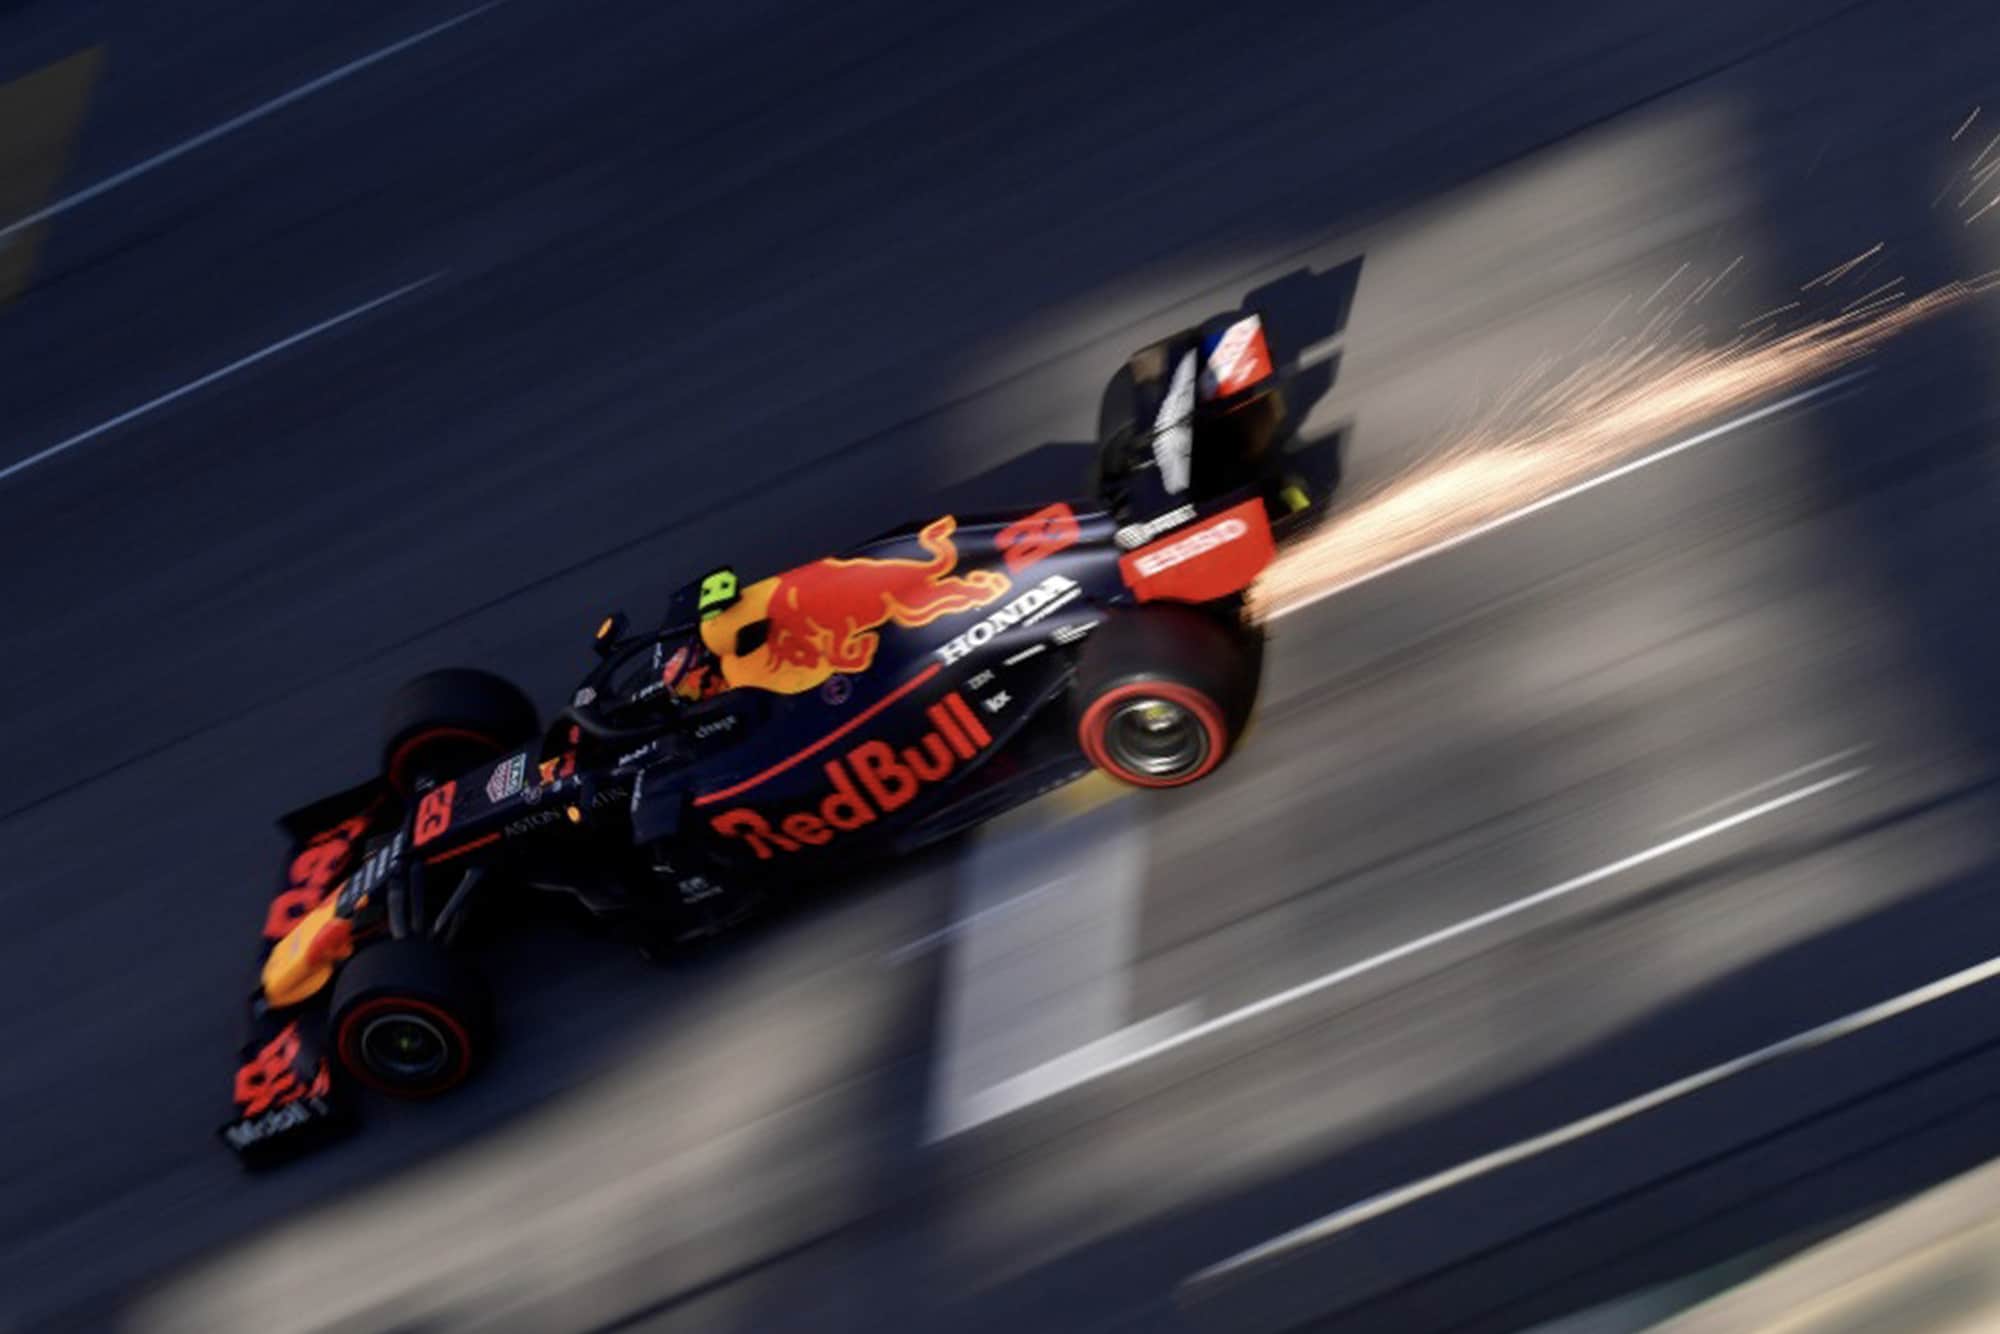 Alexander Albon in the Red Bull RB15 during the 2019 Brazilian Grand Prix